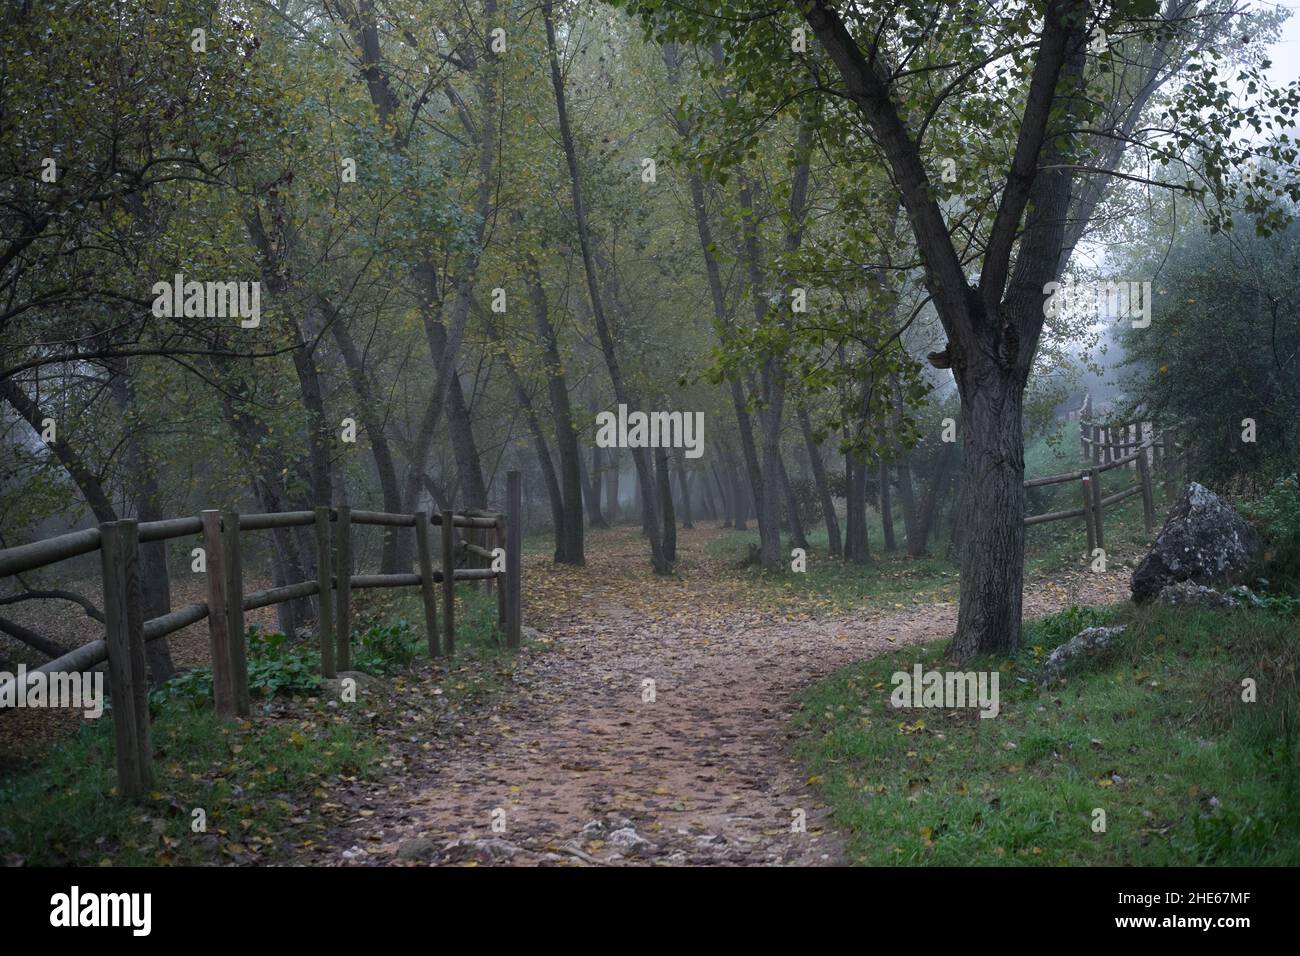 Misty woods with dirt track and wooden fence Stock Photo